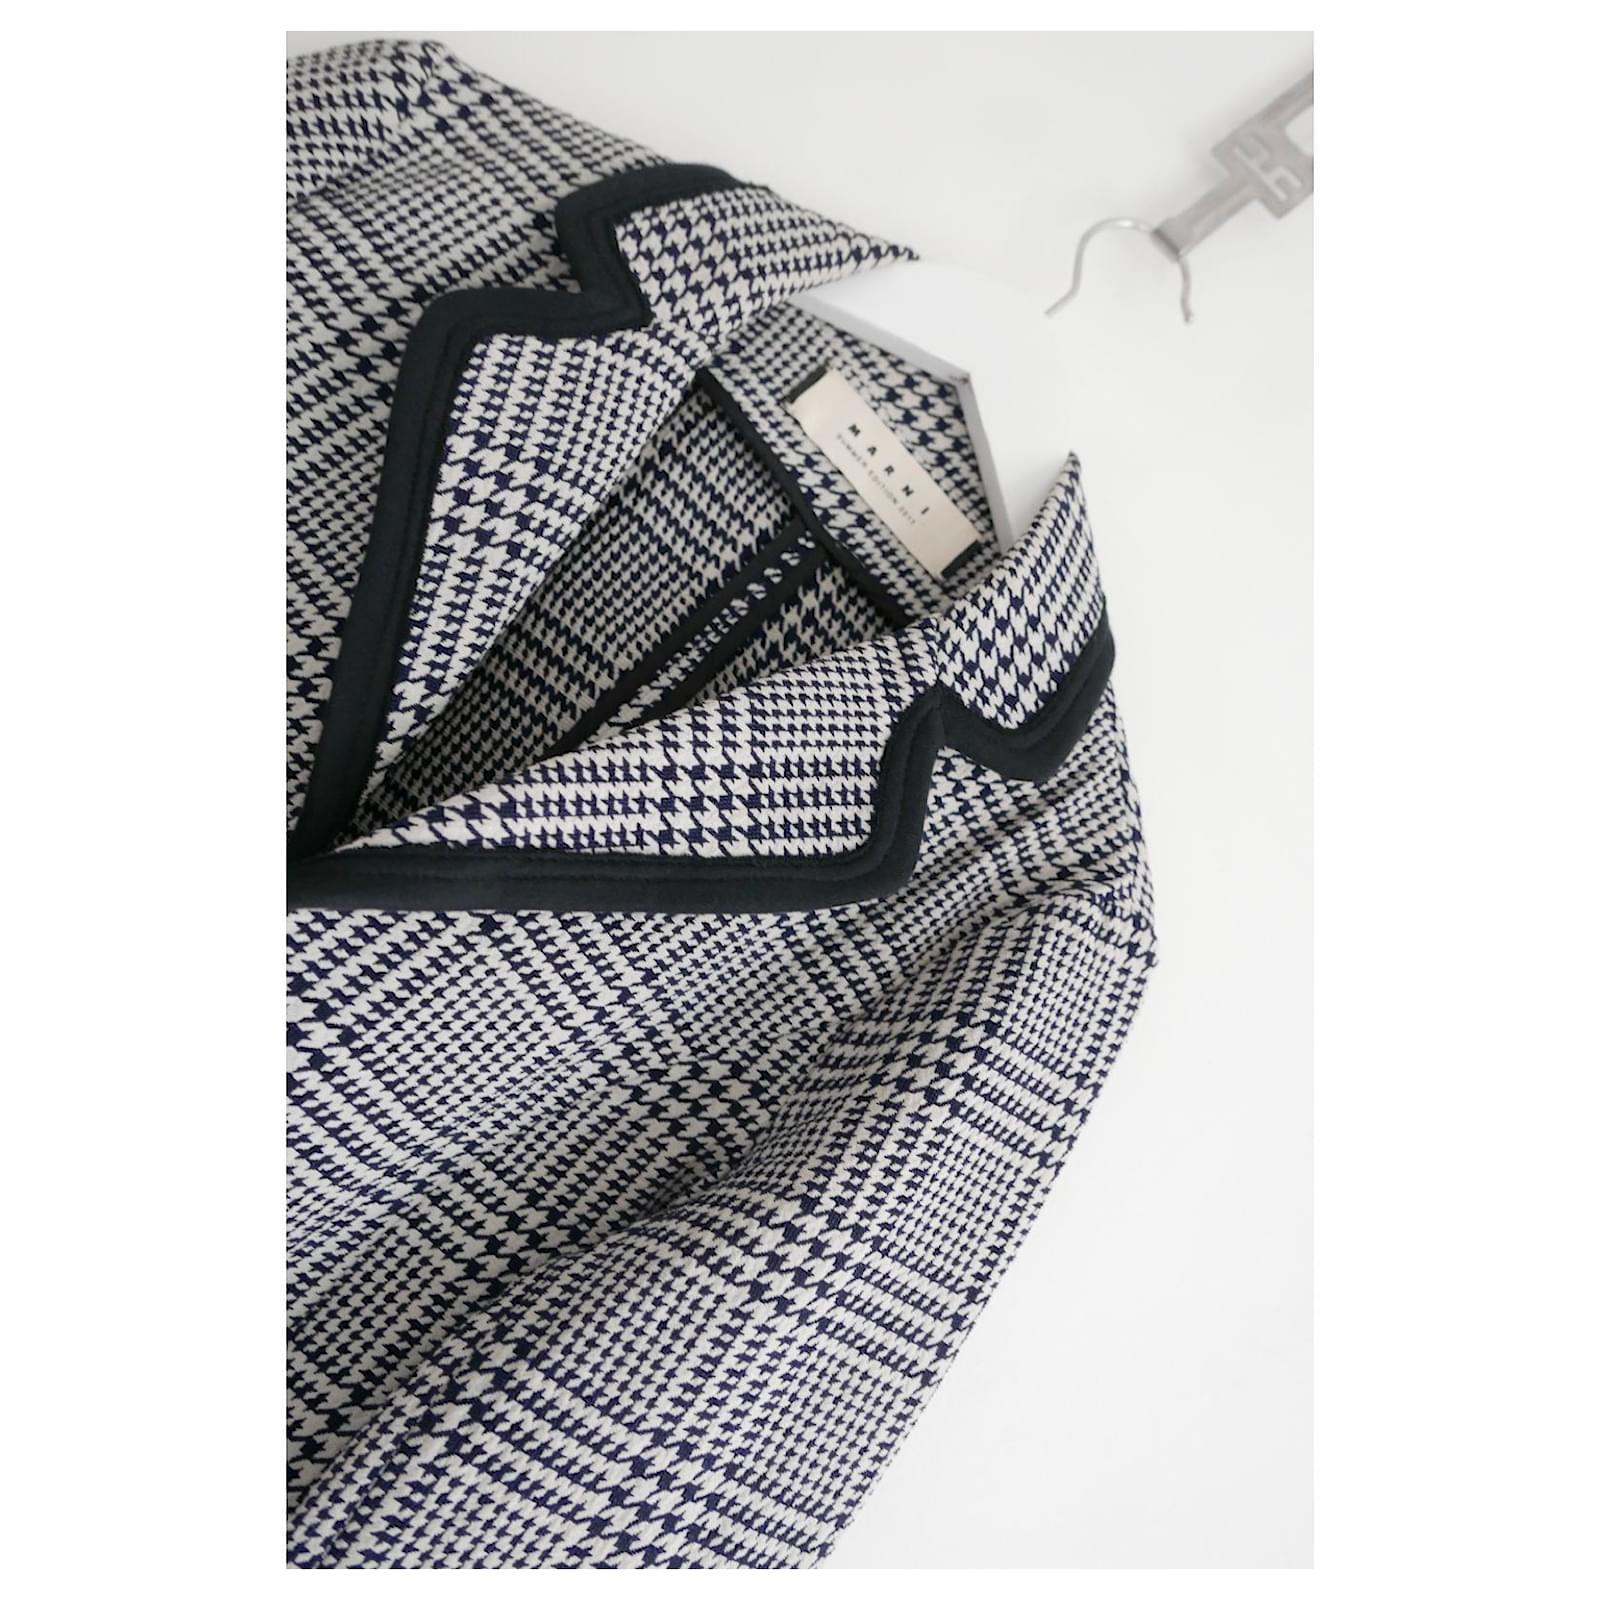 Marni Resort 2011 Houndstooth Jacket In Excellent Condition For Sale In London, GB